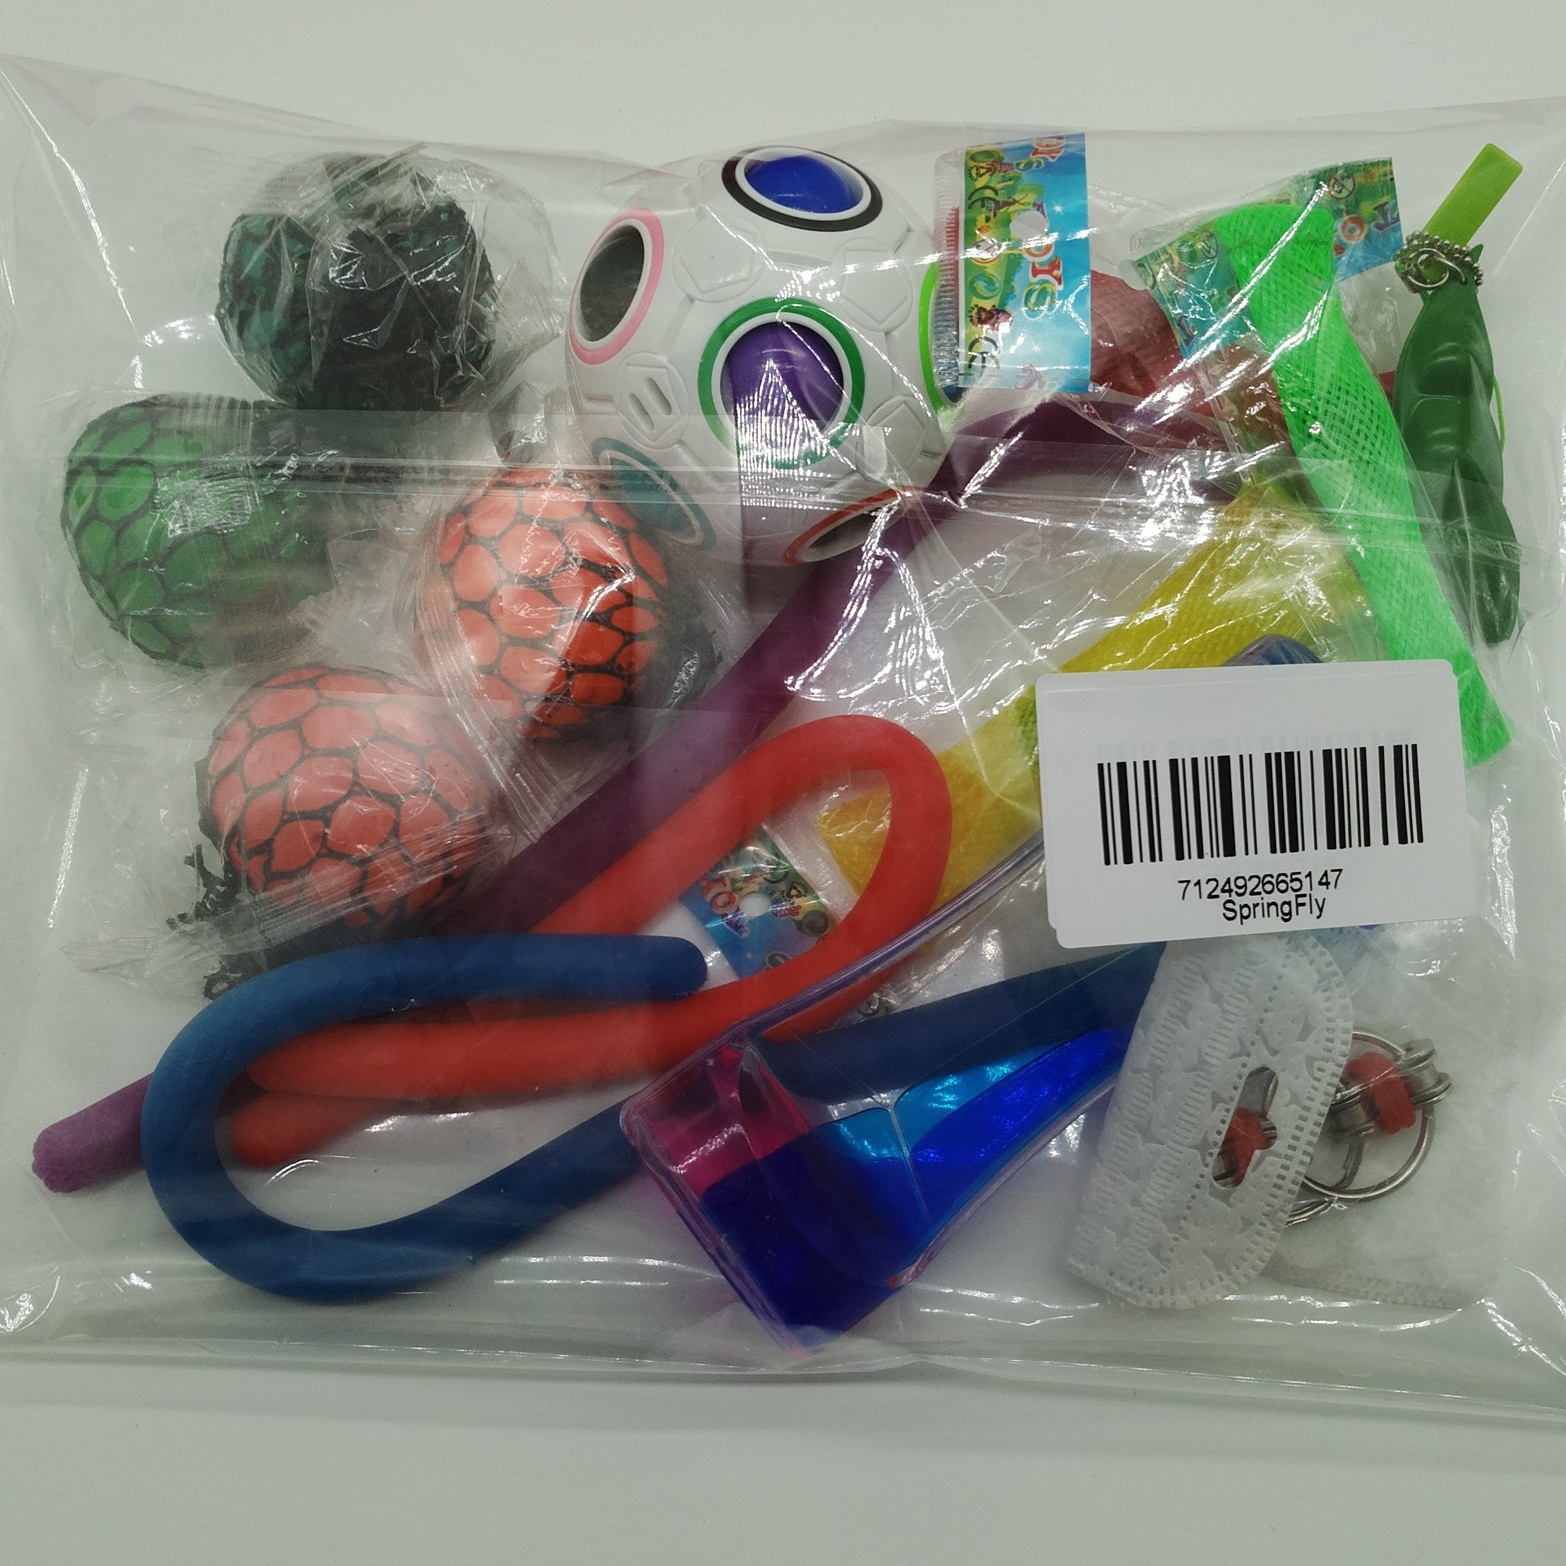 SpringFly 12 Pack Bundle Sensory Toys-Bike Chain/Liquid Motion Timer/Rainbow Magic Balls/Mesh And Marble Toy/Squeeze Soybeans/Squeeze Grape Balls/Stretchy String Toy for ADD ADHD Stress Relax